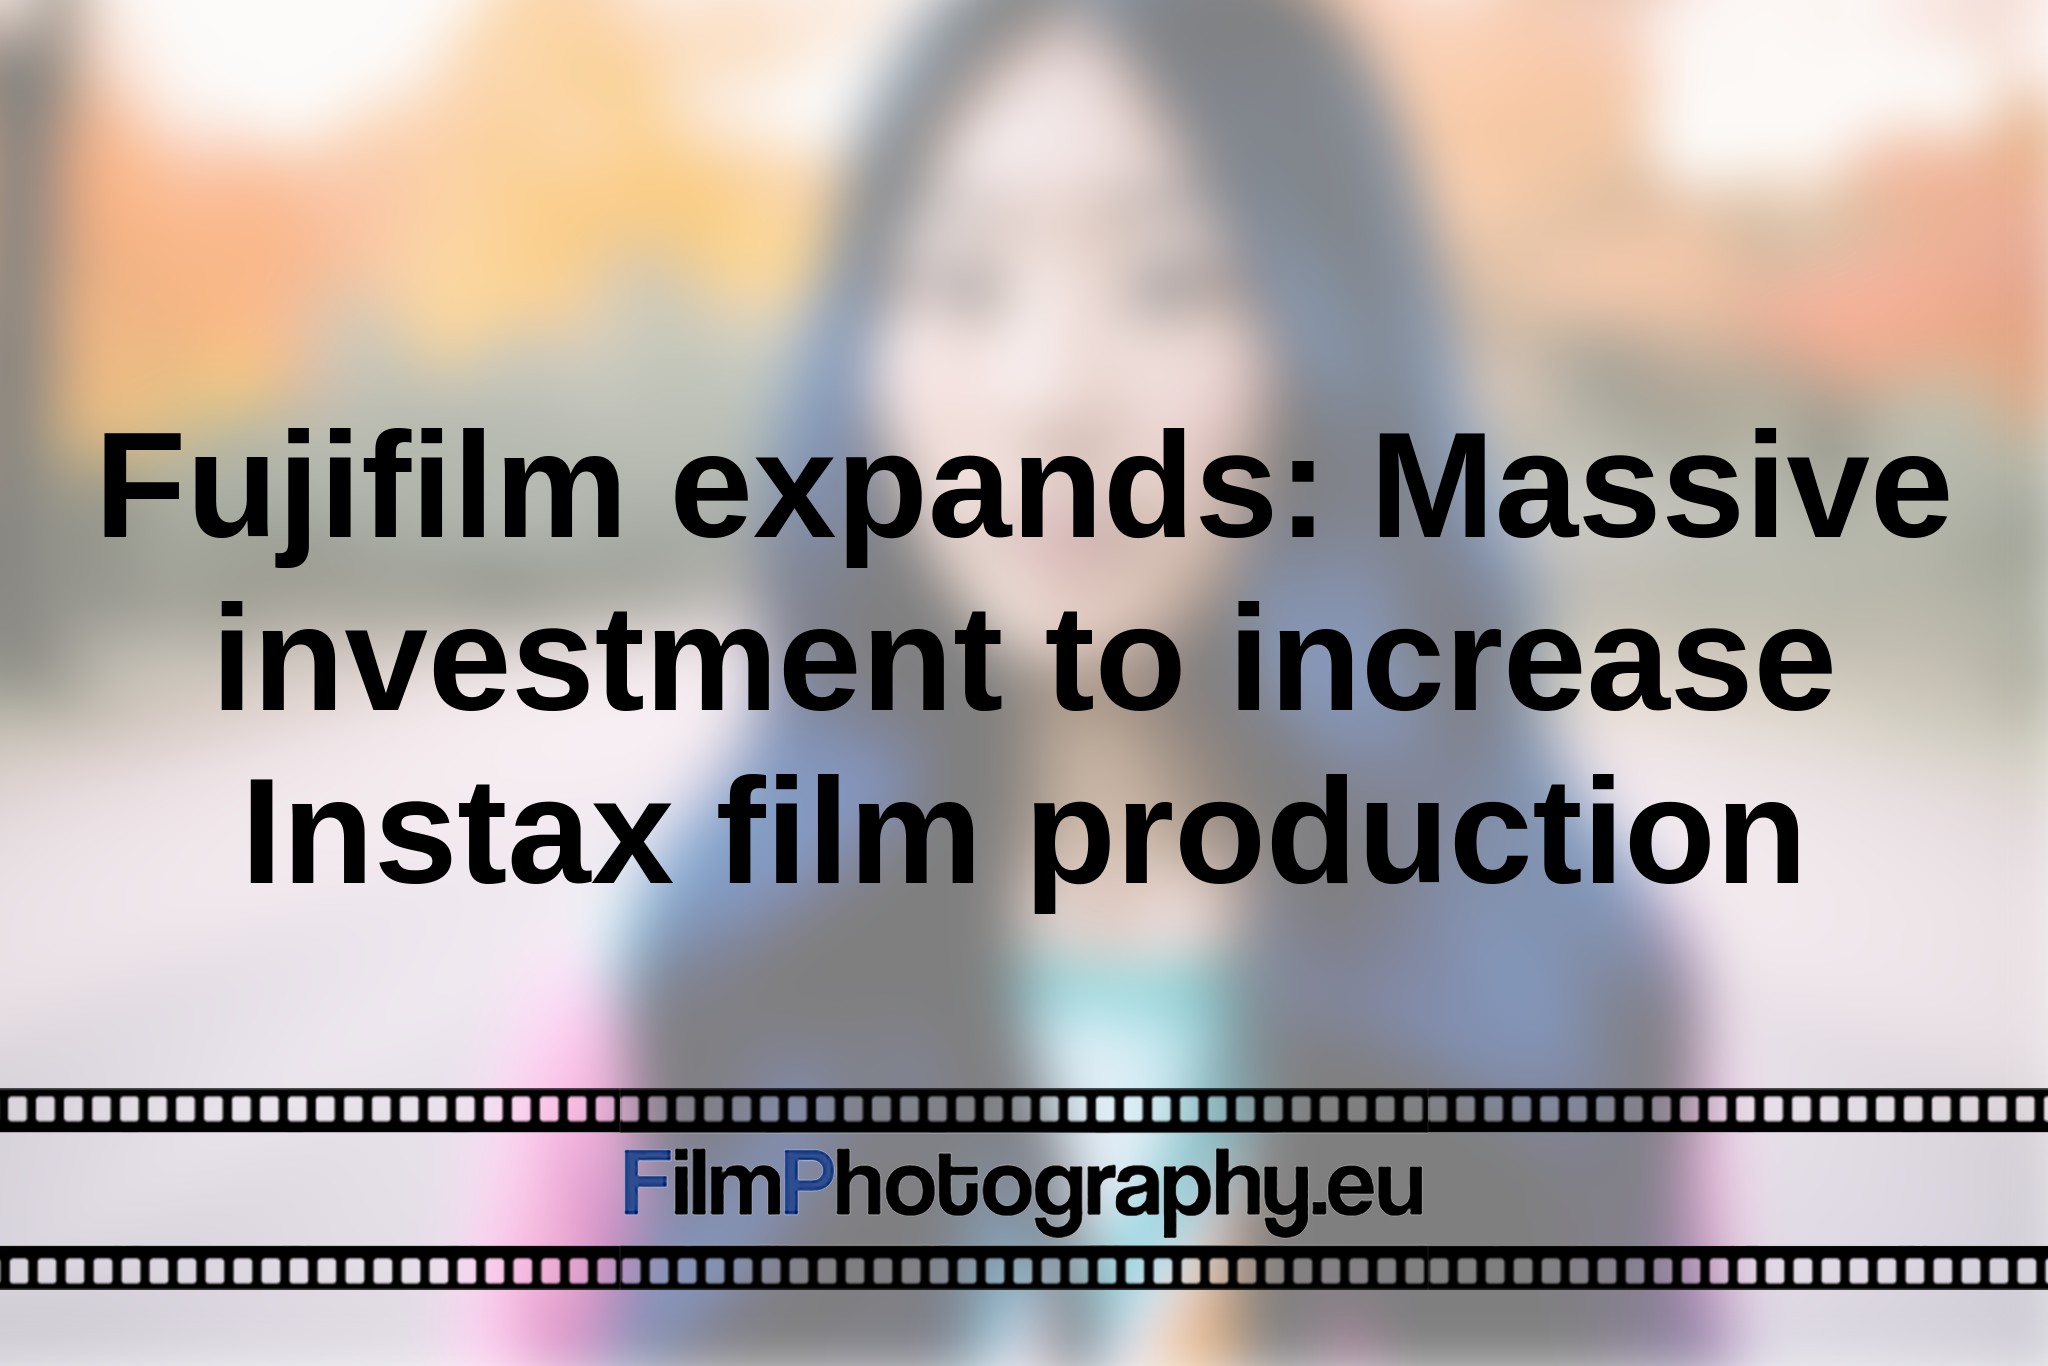 fujifilm-expands-massive-investment-to-increase-instax-film-production-en-bnv.jpg